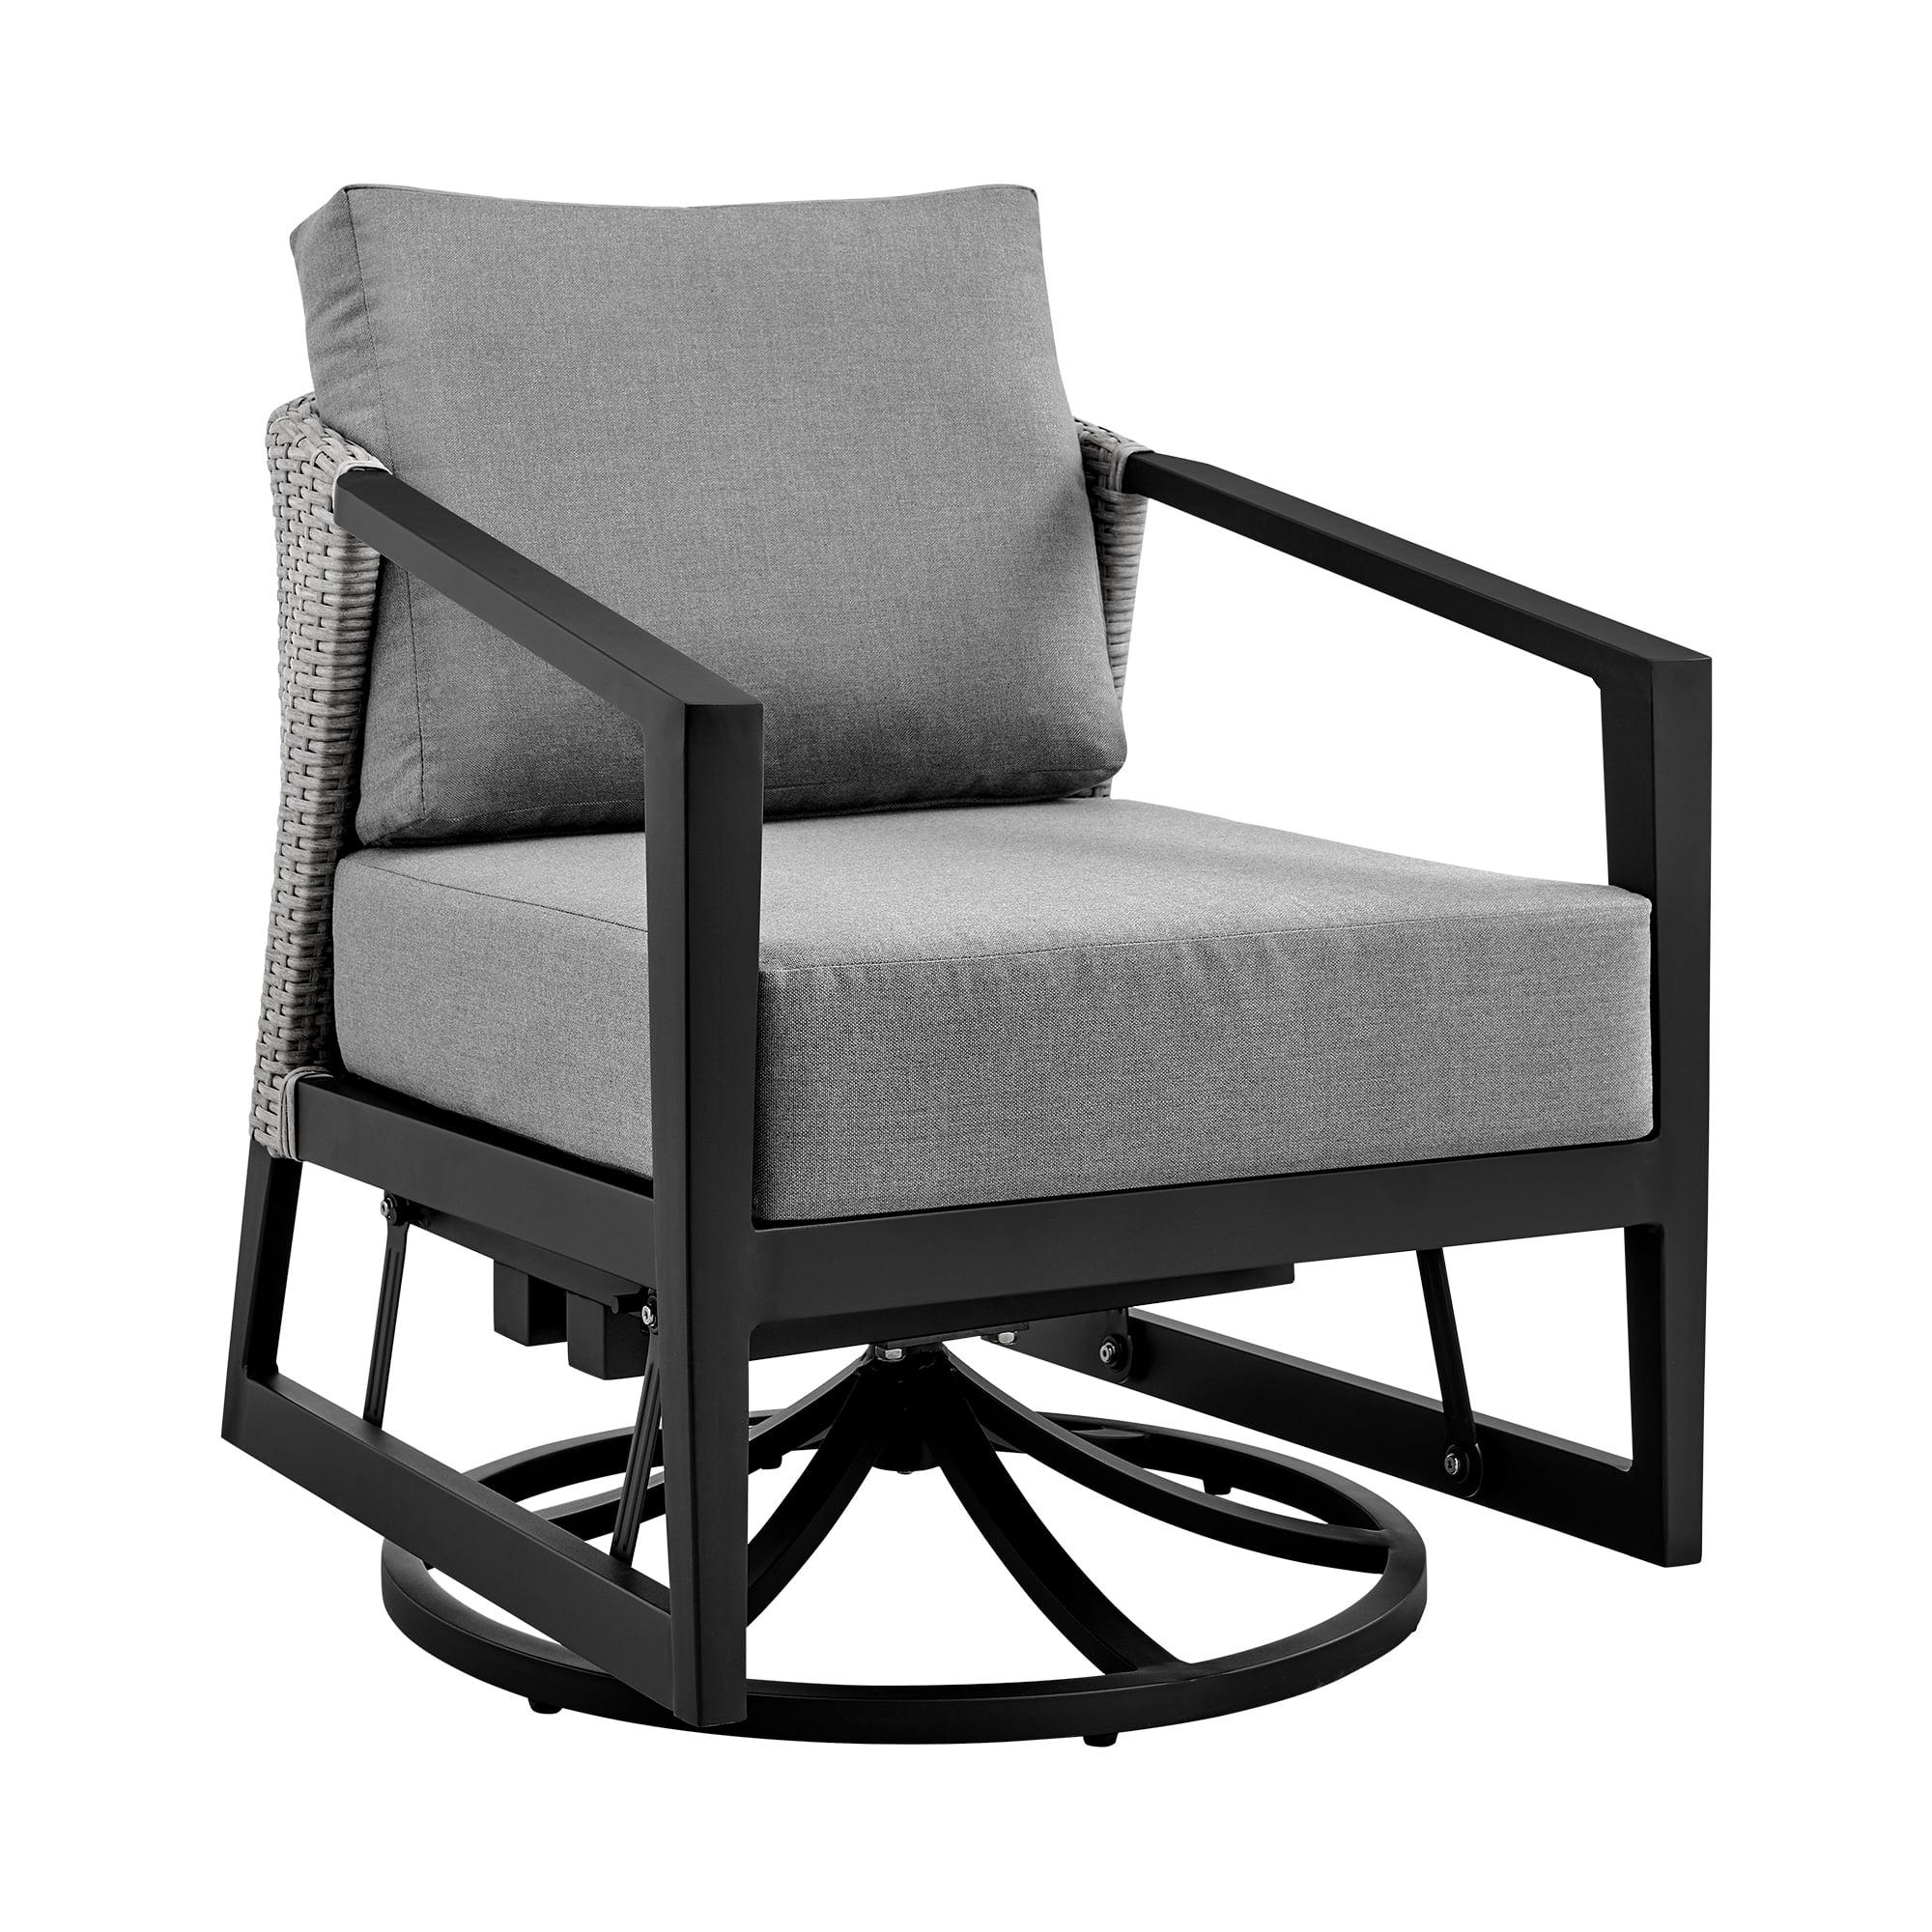 Aileen Black Aluminum and Grey Wicker Swivel Lounge Chair with Cushions